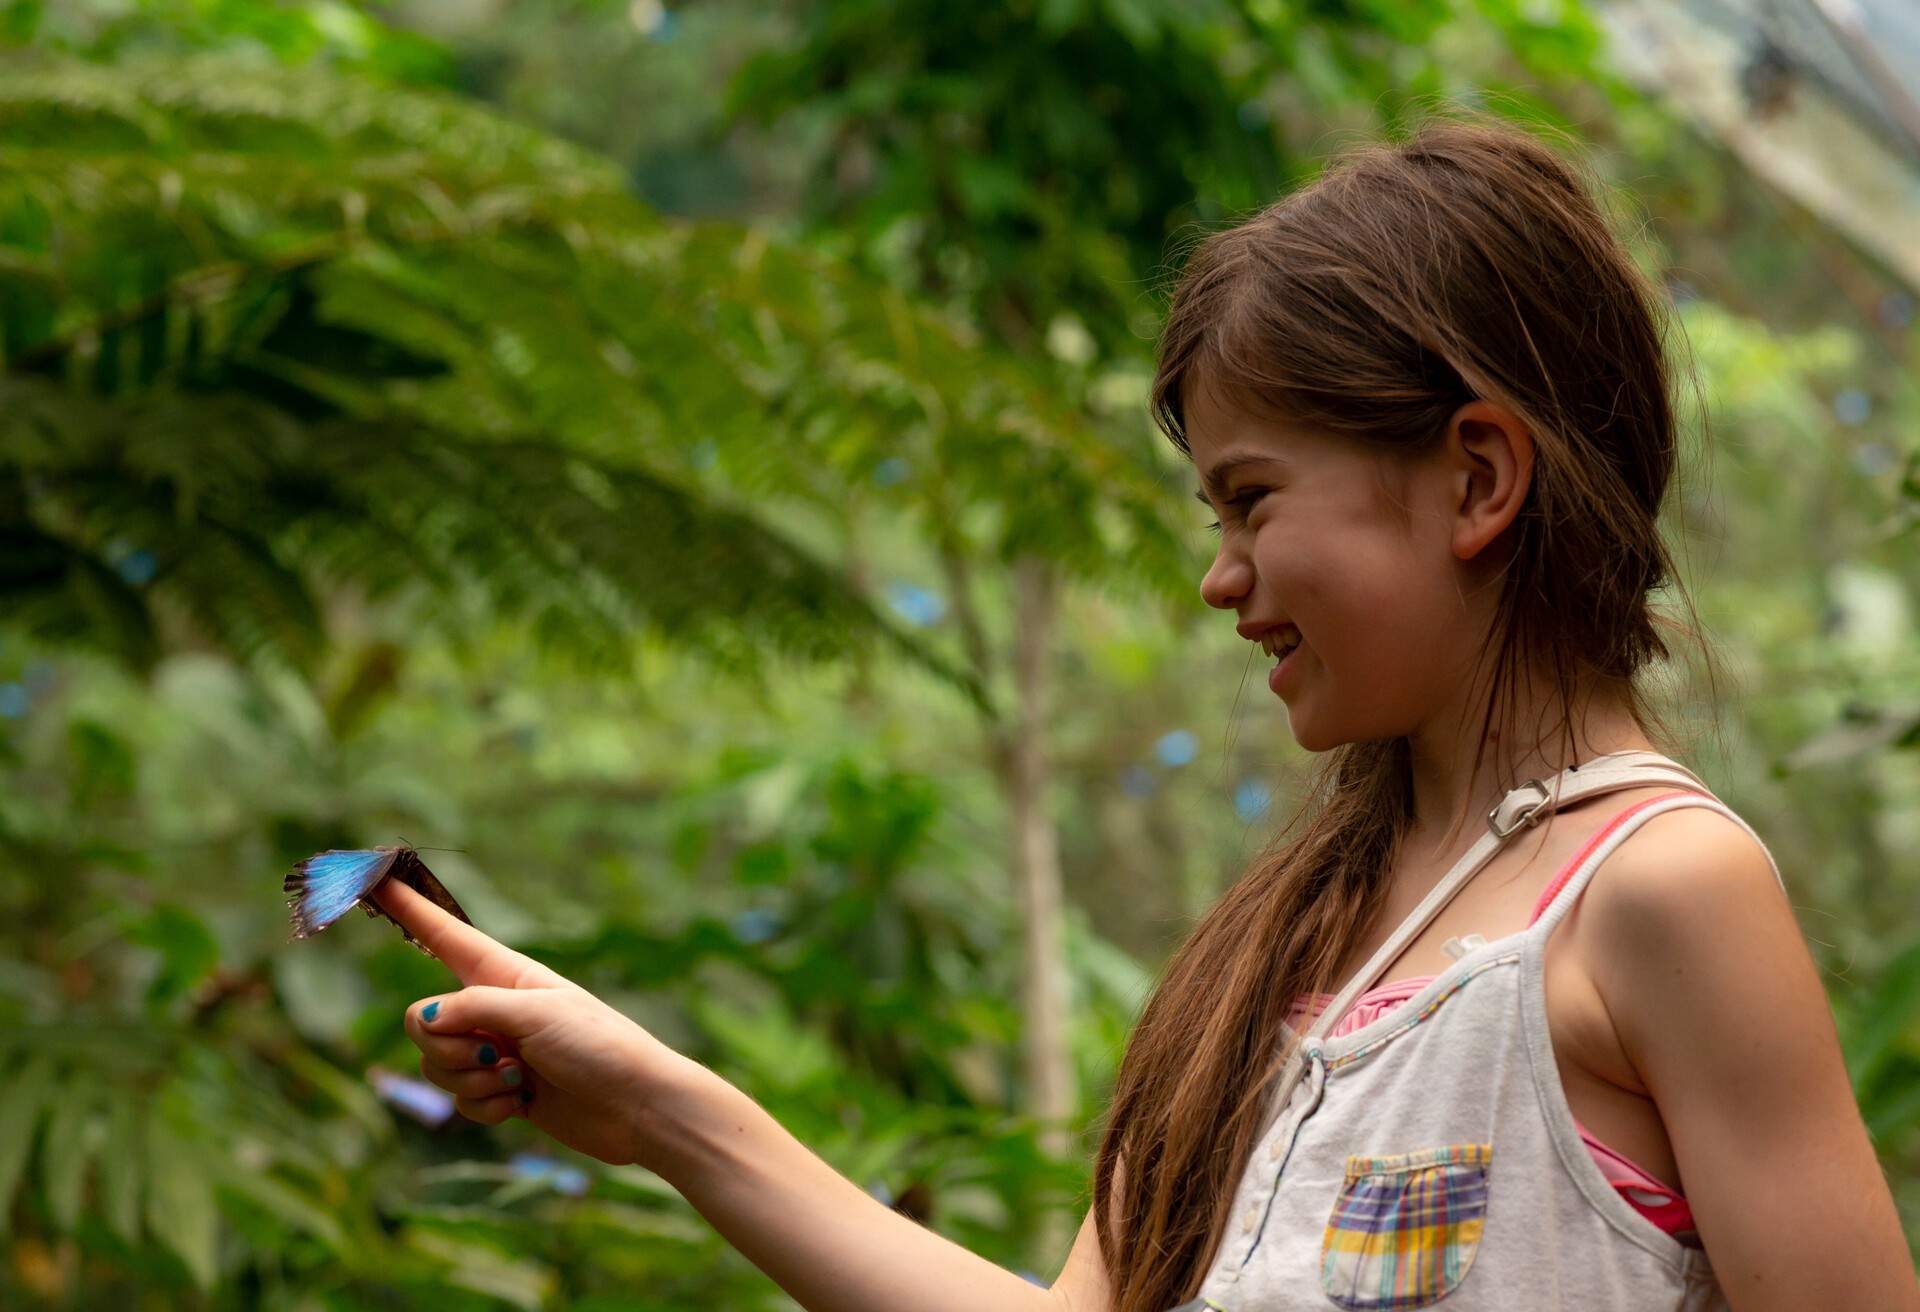 Girl holding a butterfly in Costa Rica